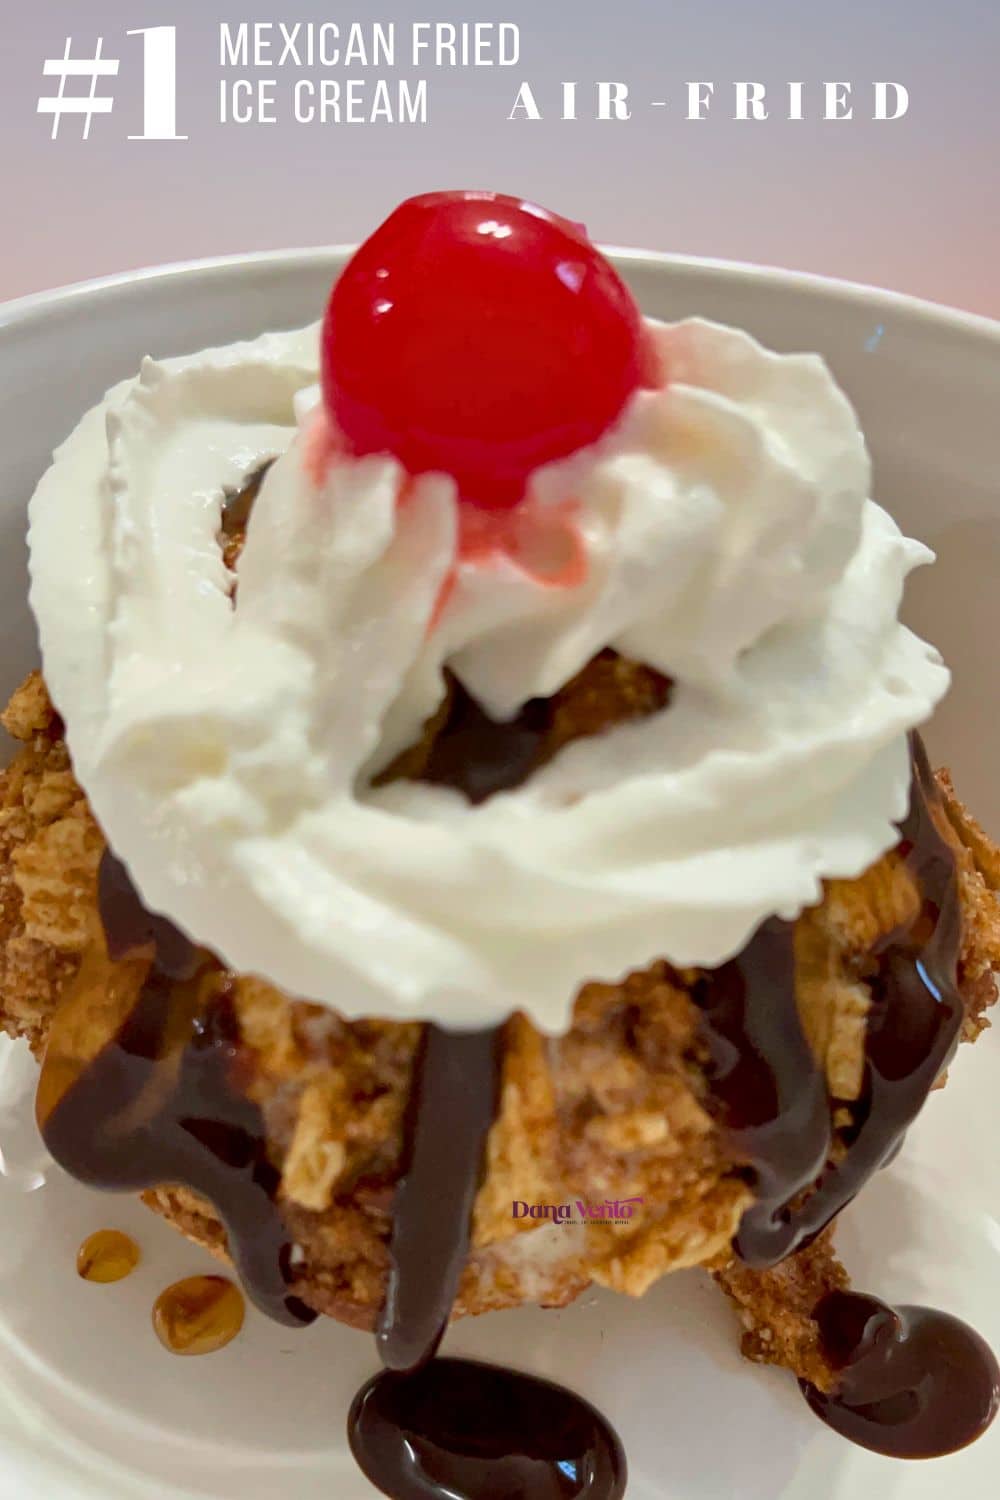 A golden Air Fried Mexican Fried Ice Cream ball topped with caramel chocolate syrup whipped cream and a cherry